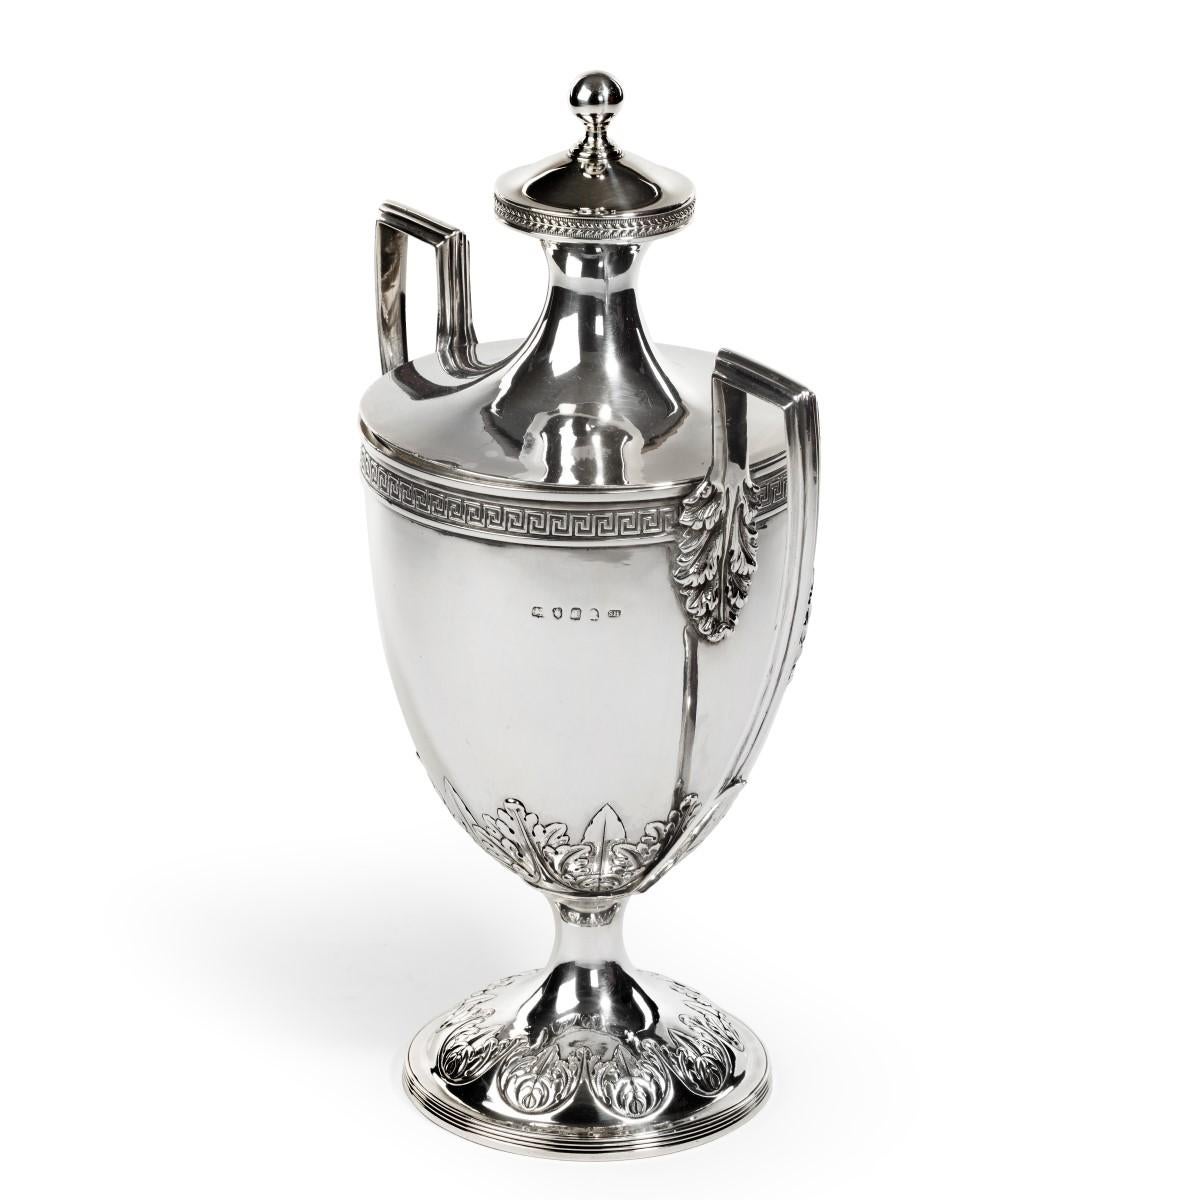 Early 19th Century George III Lloyds Patriotic Fund Silver and Silver Gilt Vase and Cover by Samuel For Sale